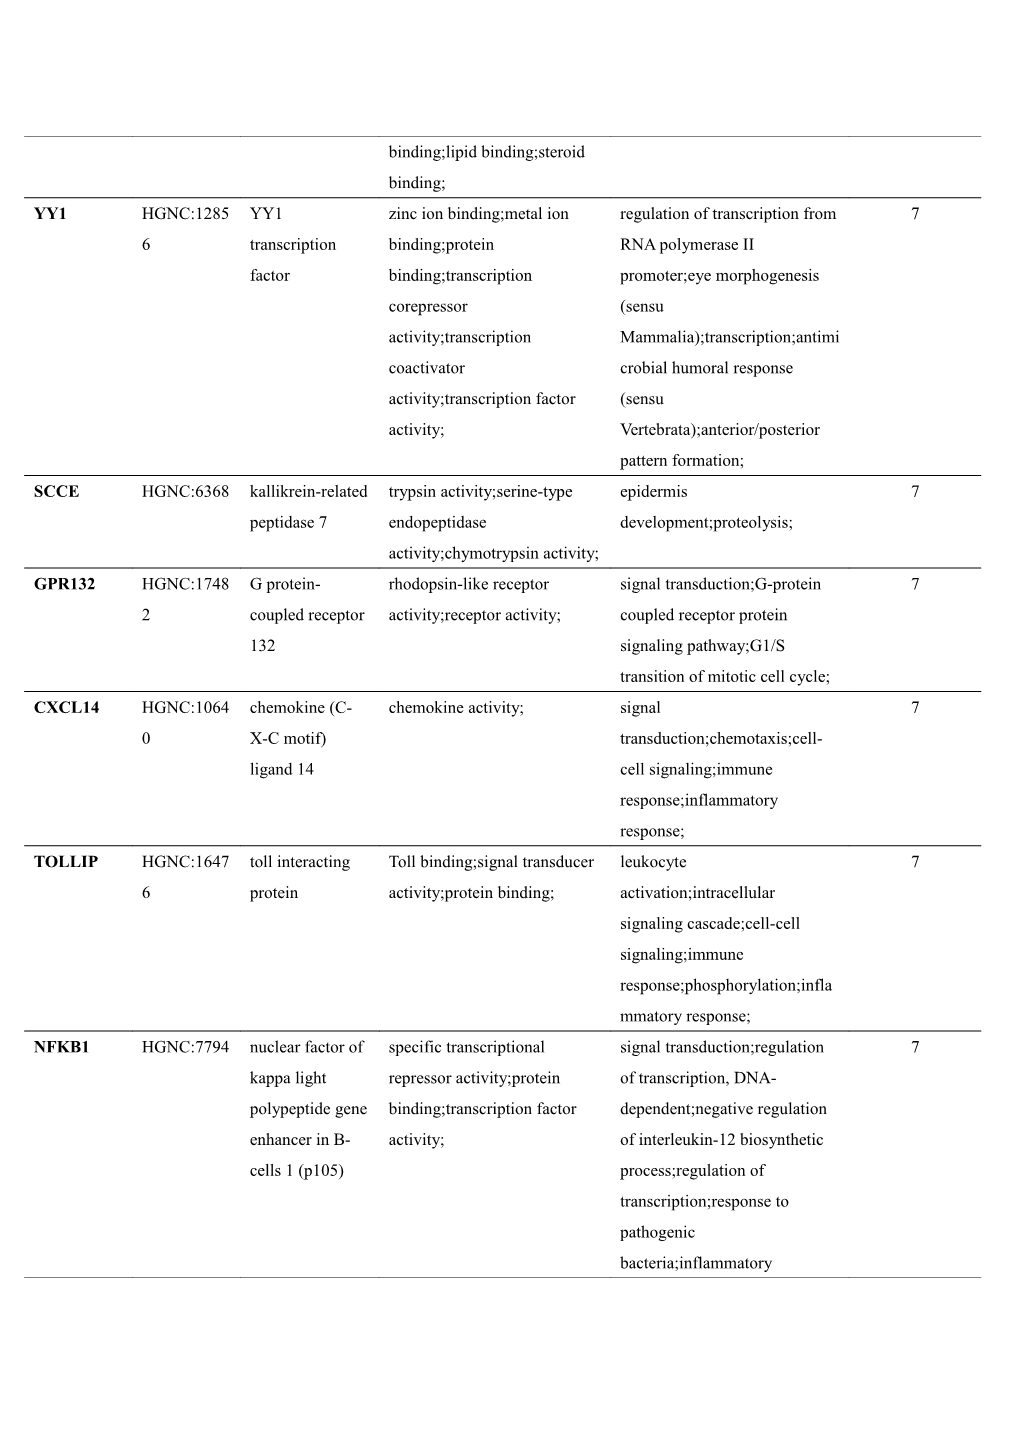 Supplementary Table 3: Gene Connectivities Only in Inflammatory Condition but Not in Normal